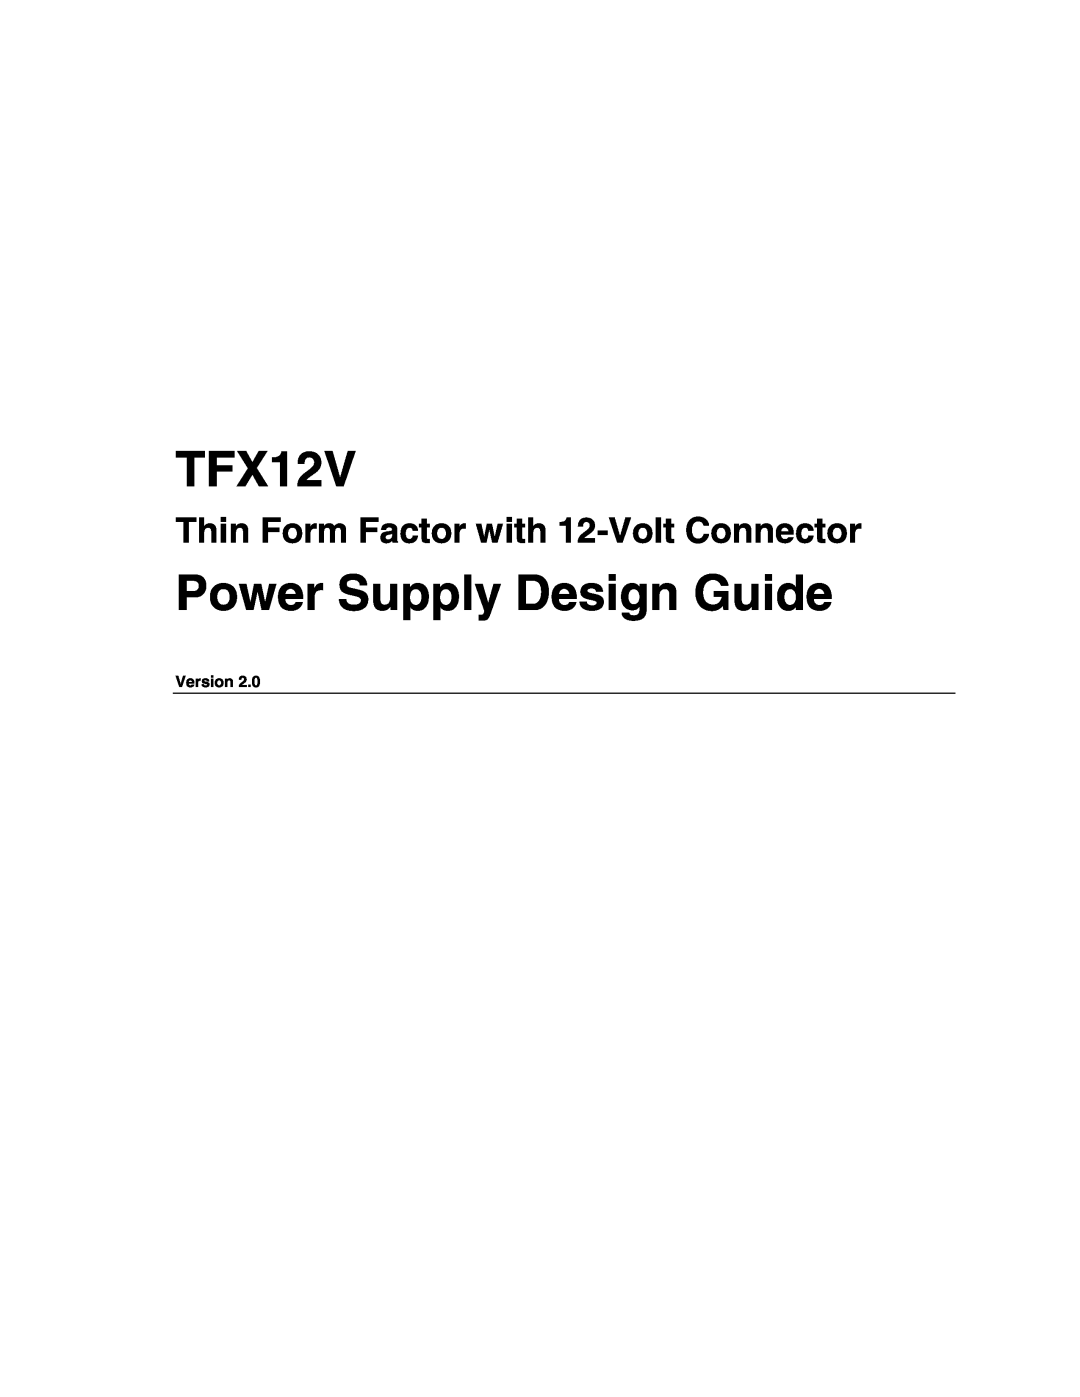 Intel TFX12V manual Thin Form Factor with 12-Volt Connector, Power Supply Design Guide, Version 